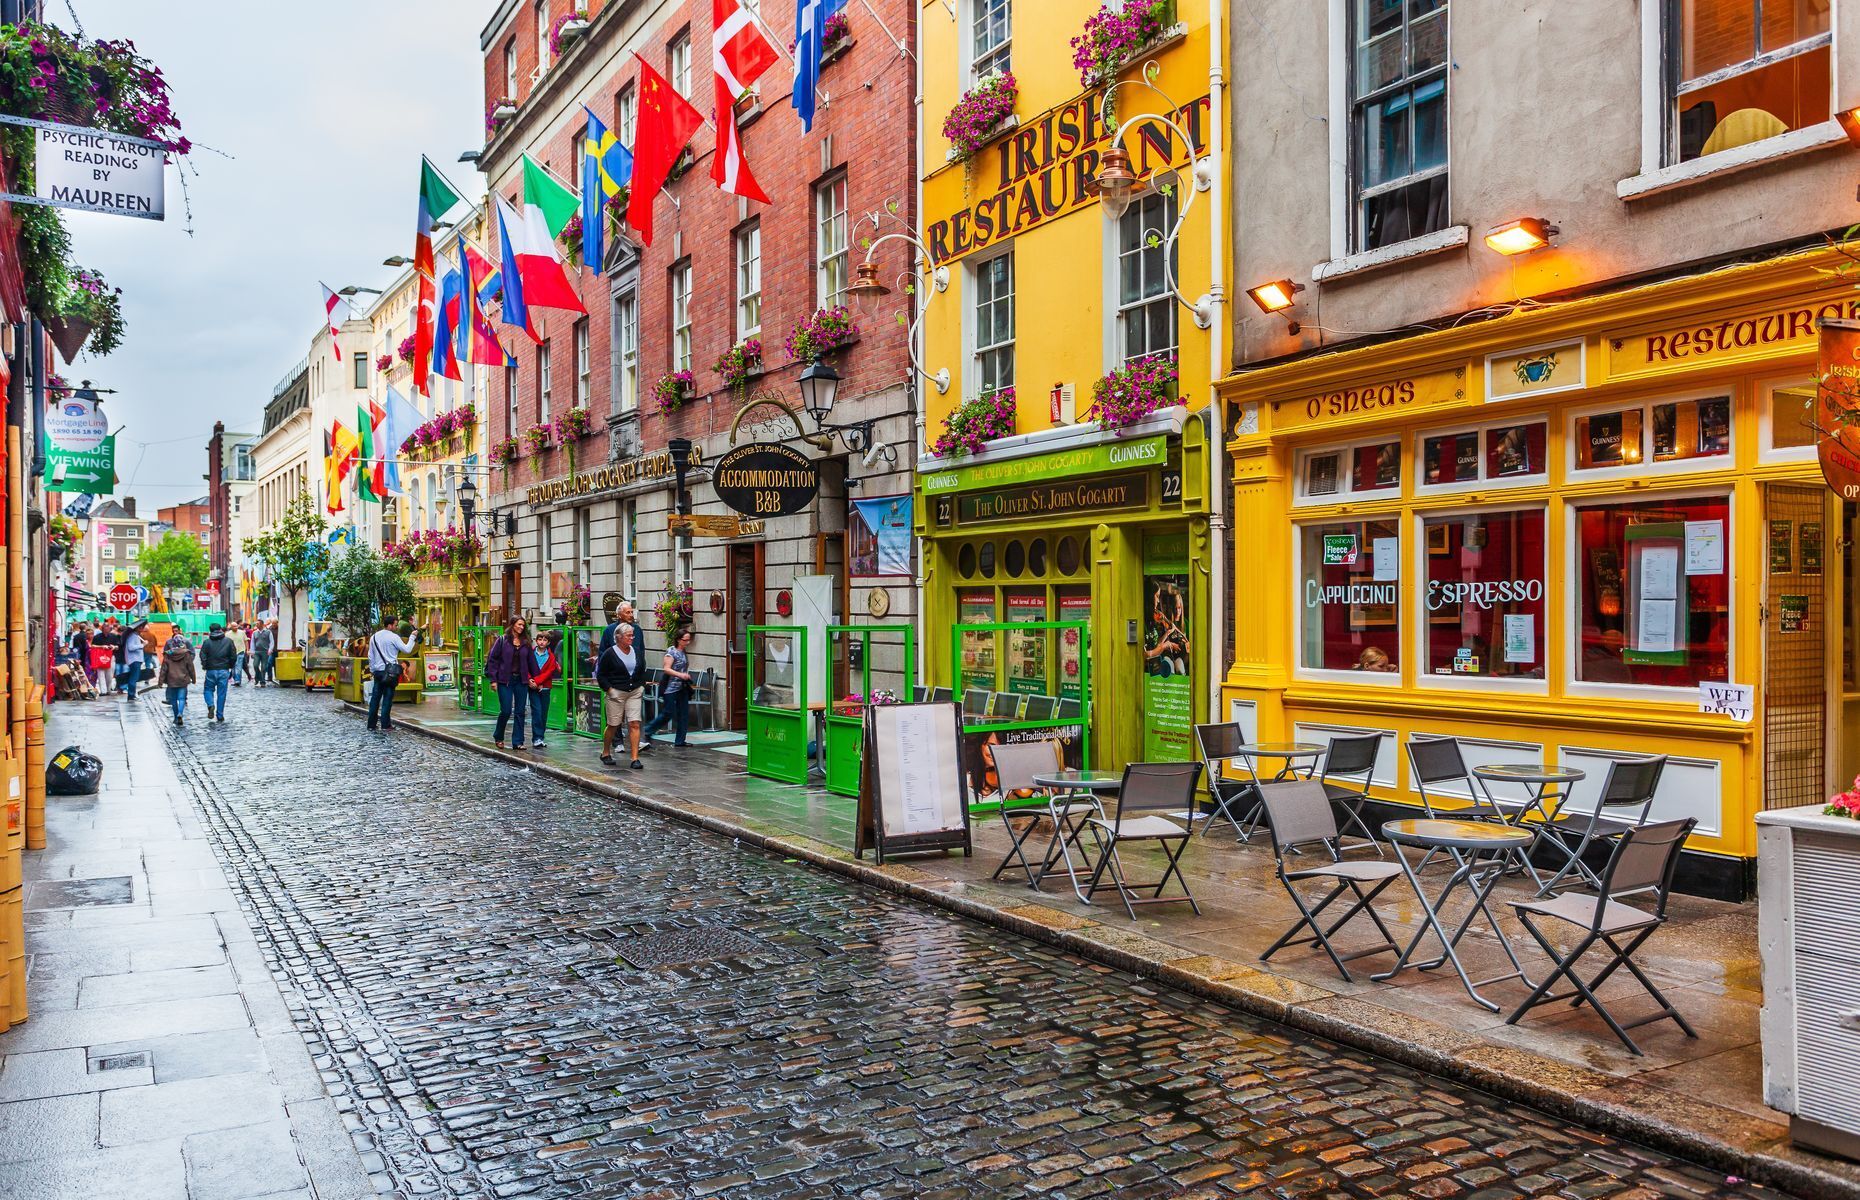 <p>In 2022, <a href="https://www.lonelyplanet.com/best-in-travel/cities" rel="noreferrer noopener">Lonely Planet</a> listed Dublin as one of the best cities to visit. And with good reason; Ireland’s capital is full of intriguing museums and festive pubs. You’ll be charmed by its lively and enchanting streets as well as its friendly residents! Don’t forget to stop in at the Temple Bar, where you can sample over 450 varieties of rare whiskey.</p>